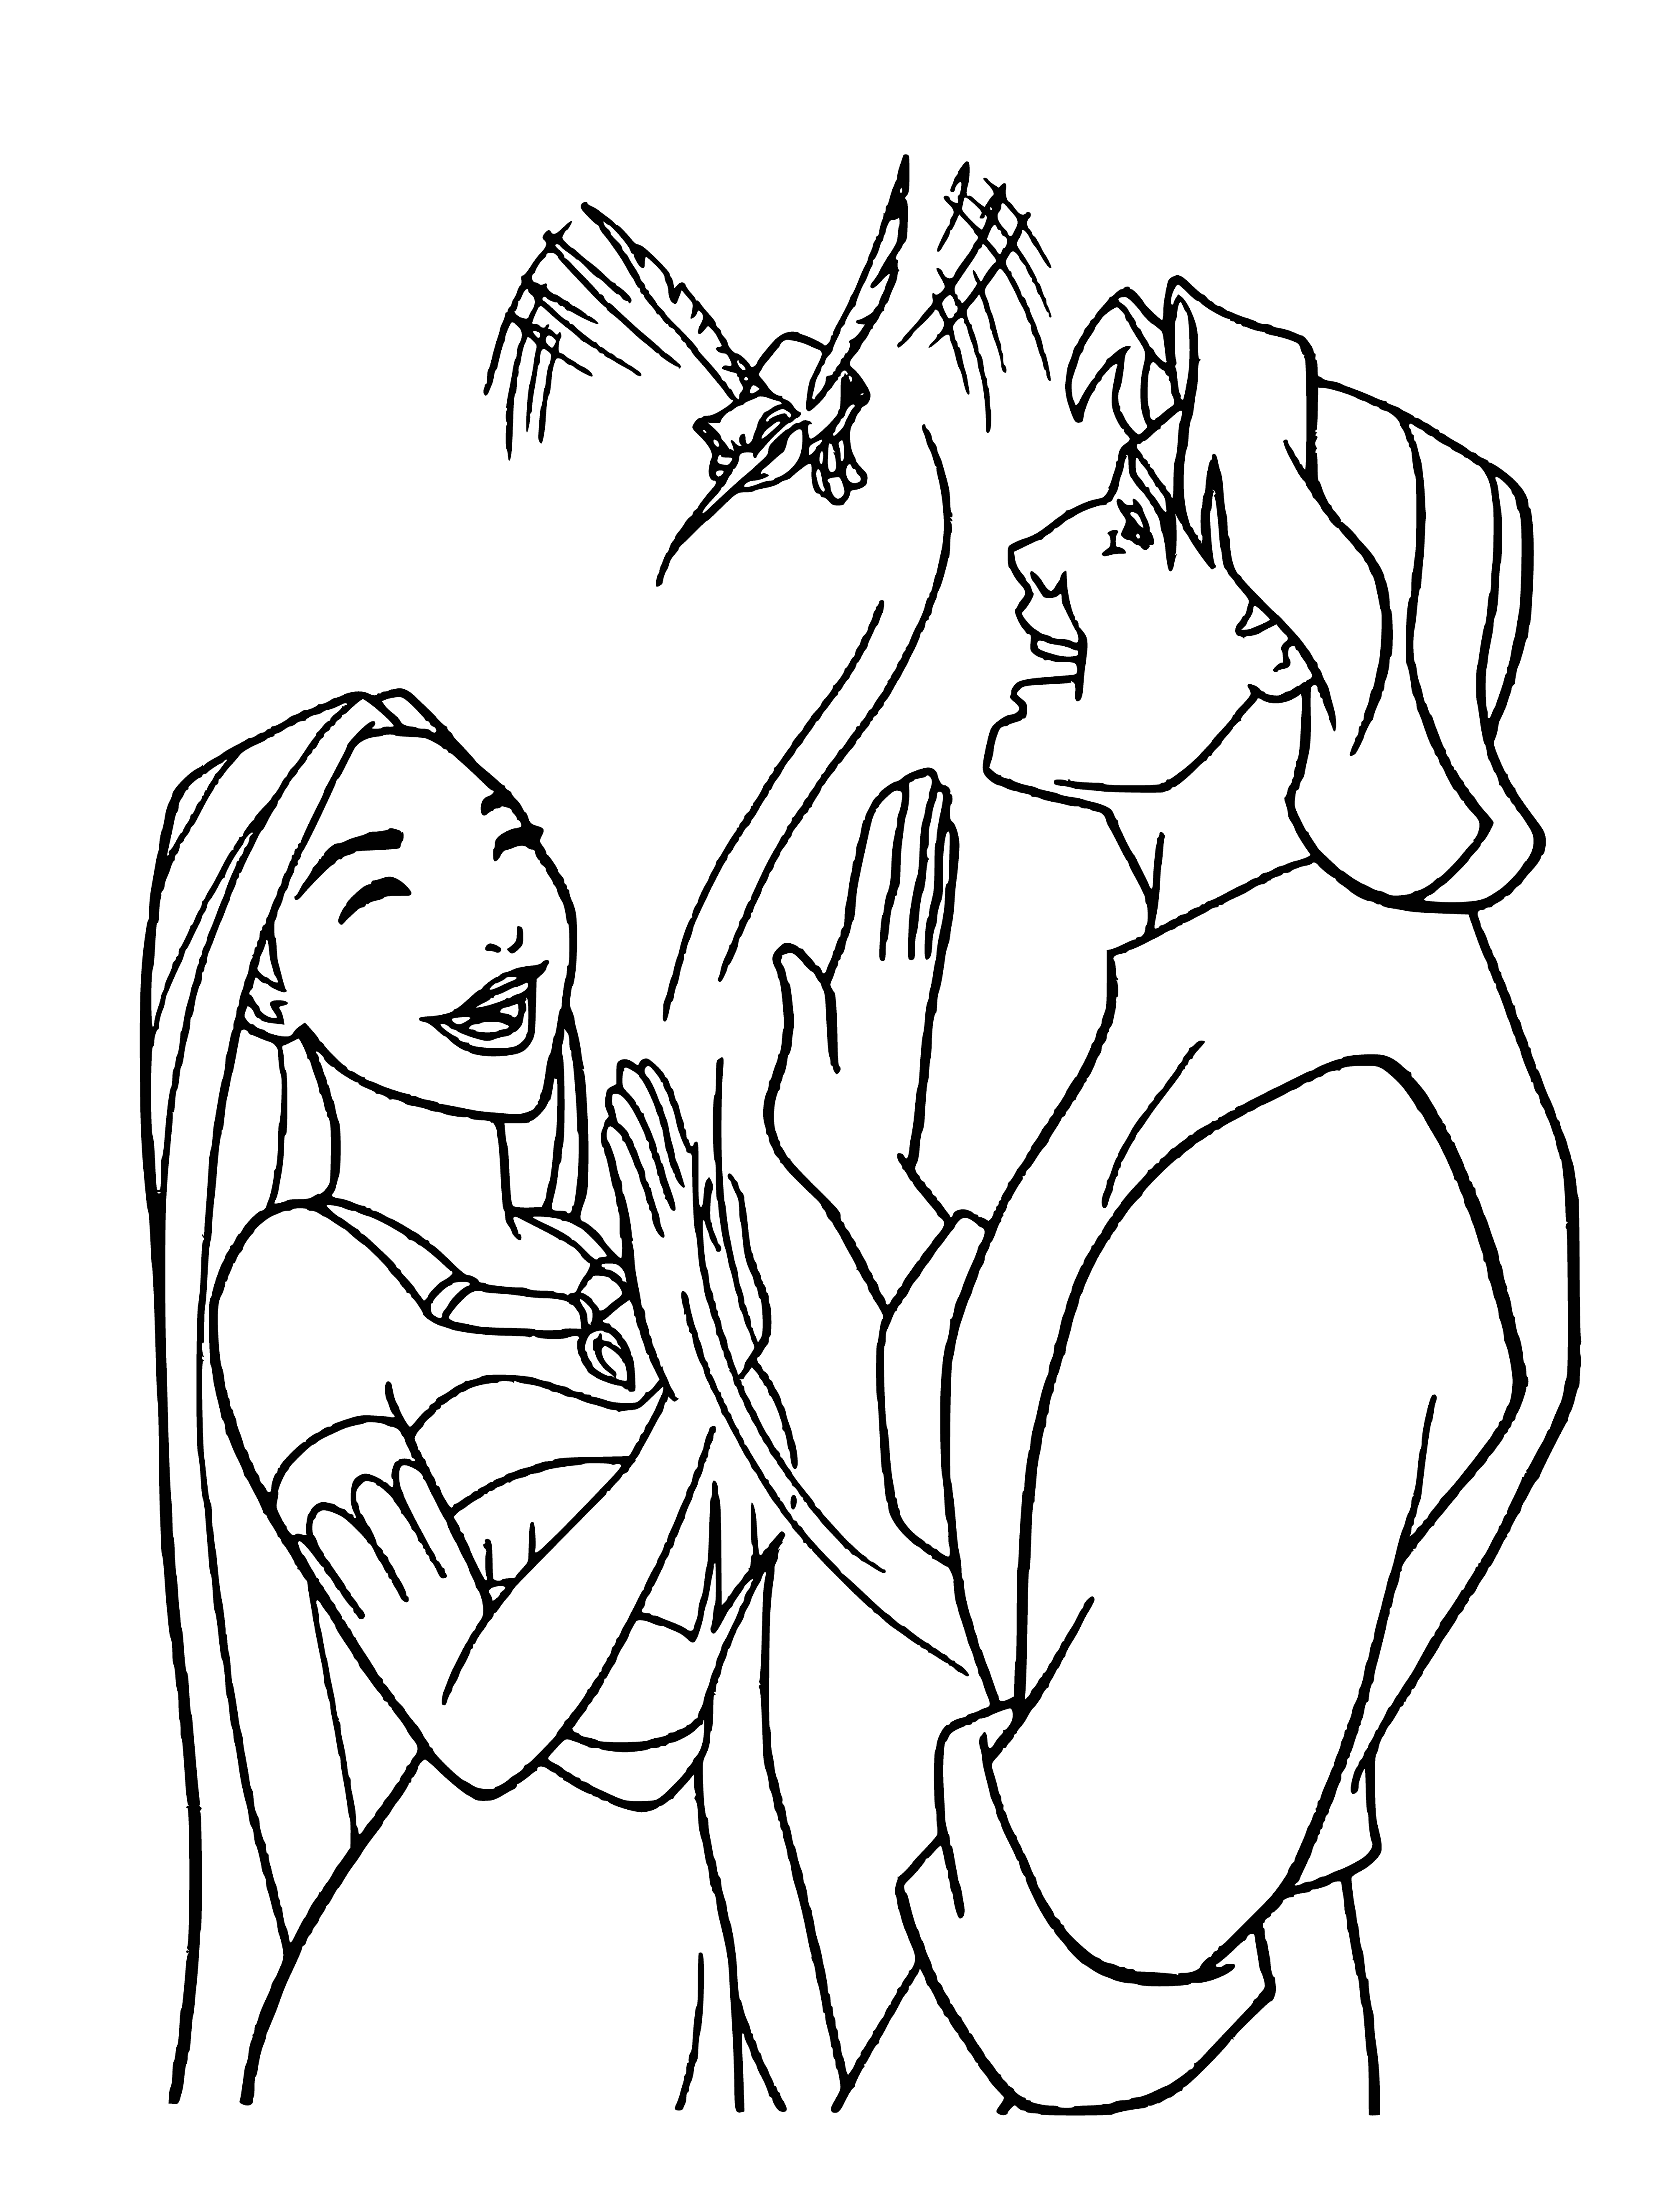 Greetings coloring page